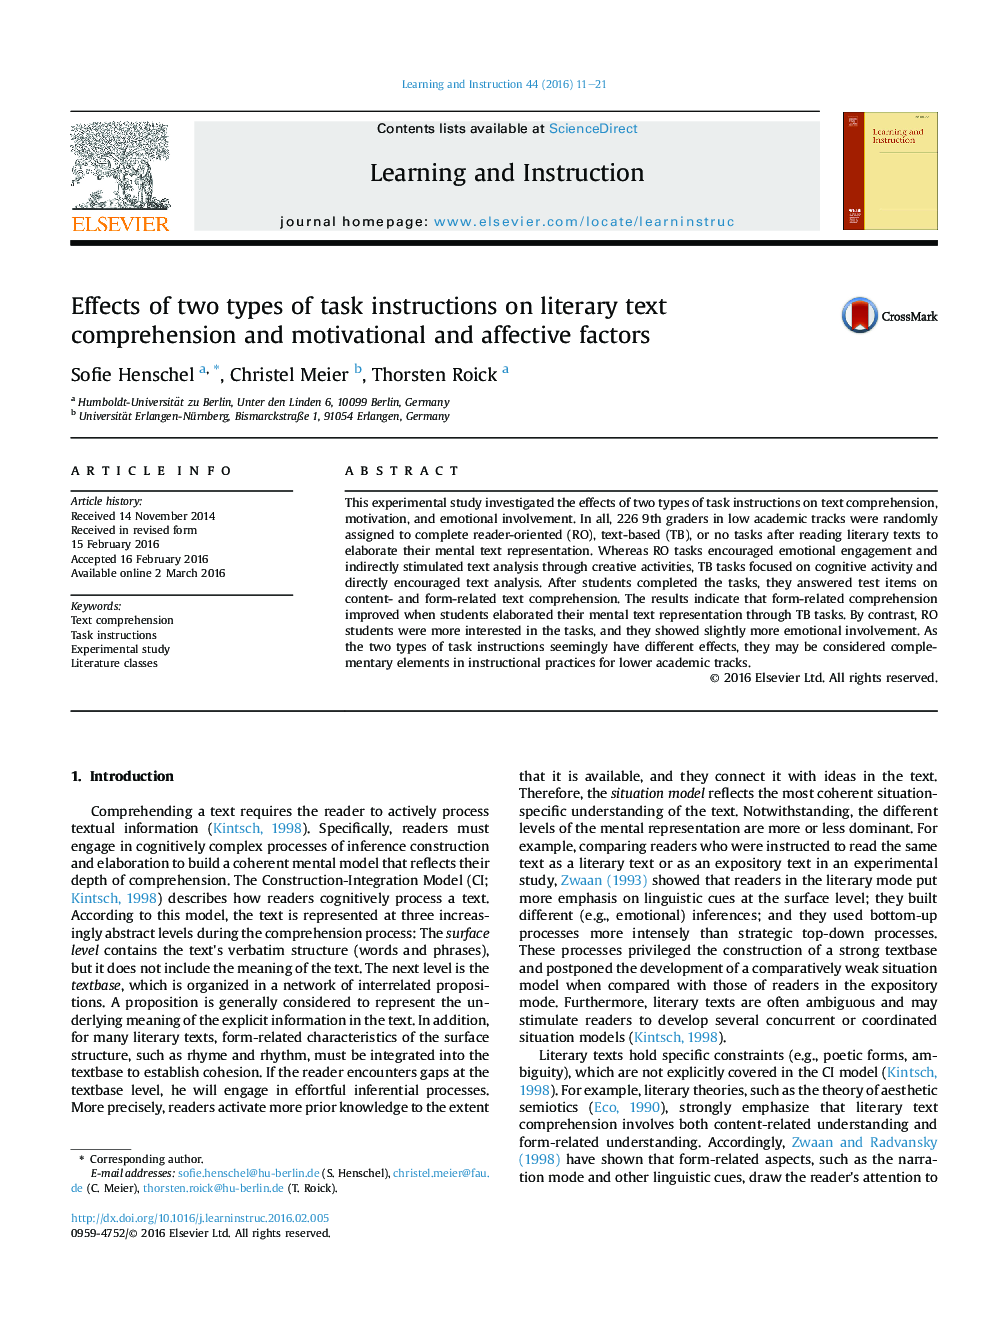 Effects of two types of task instructions on literary text comprehension and motivational and affective factors